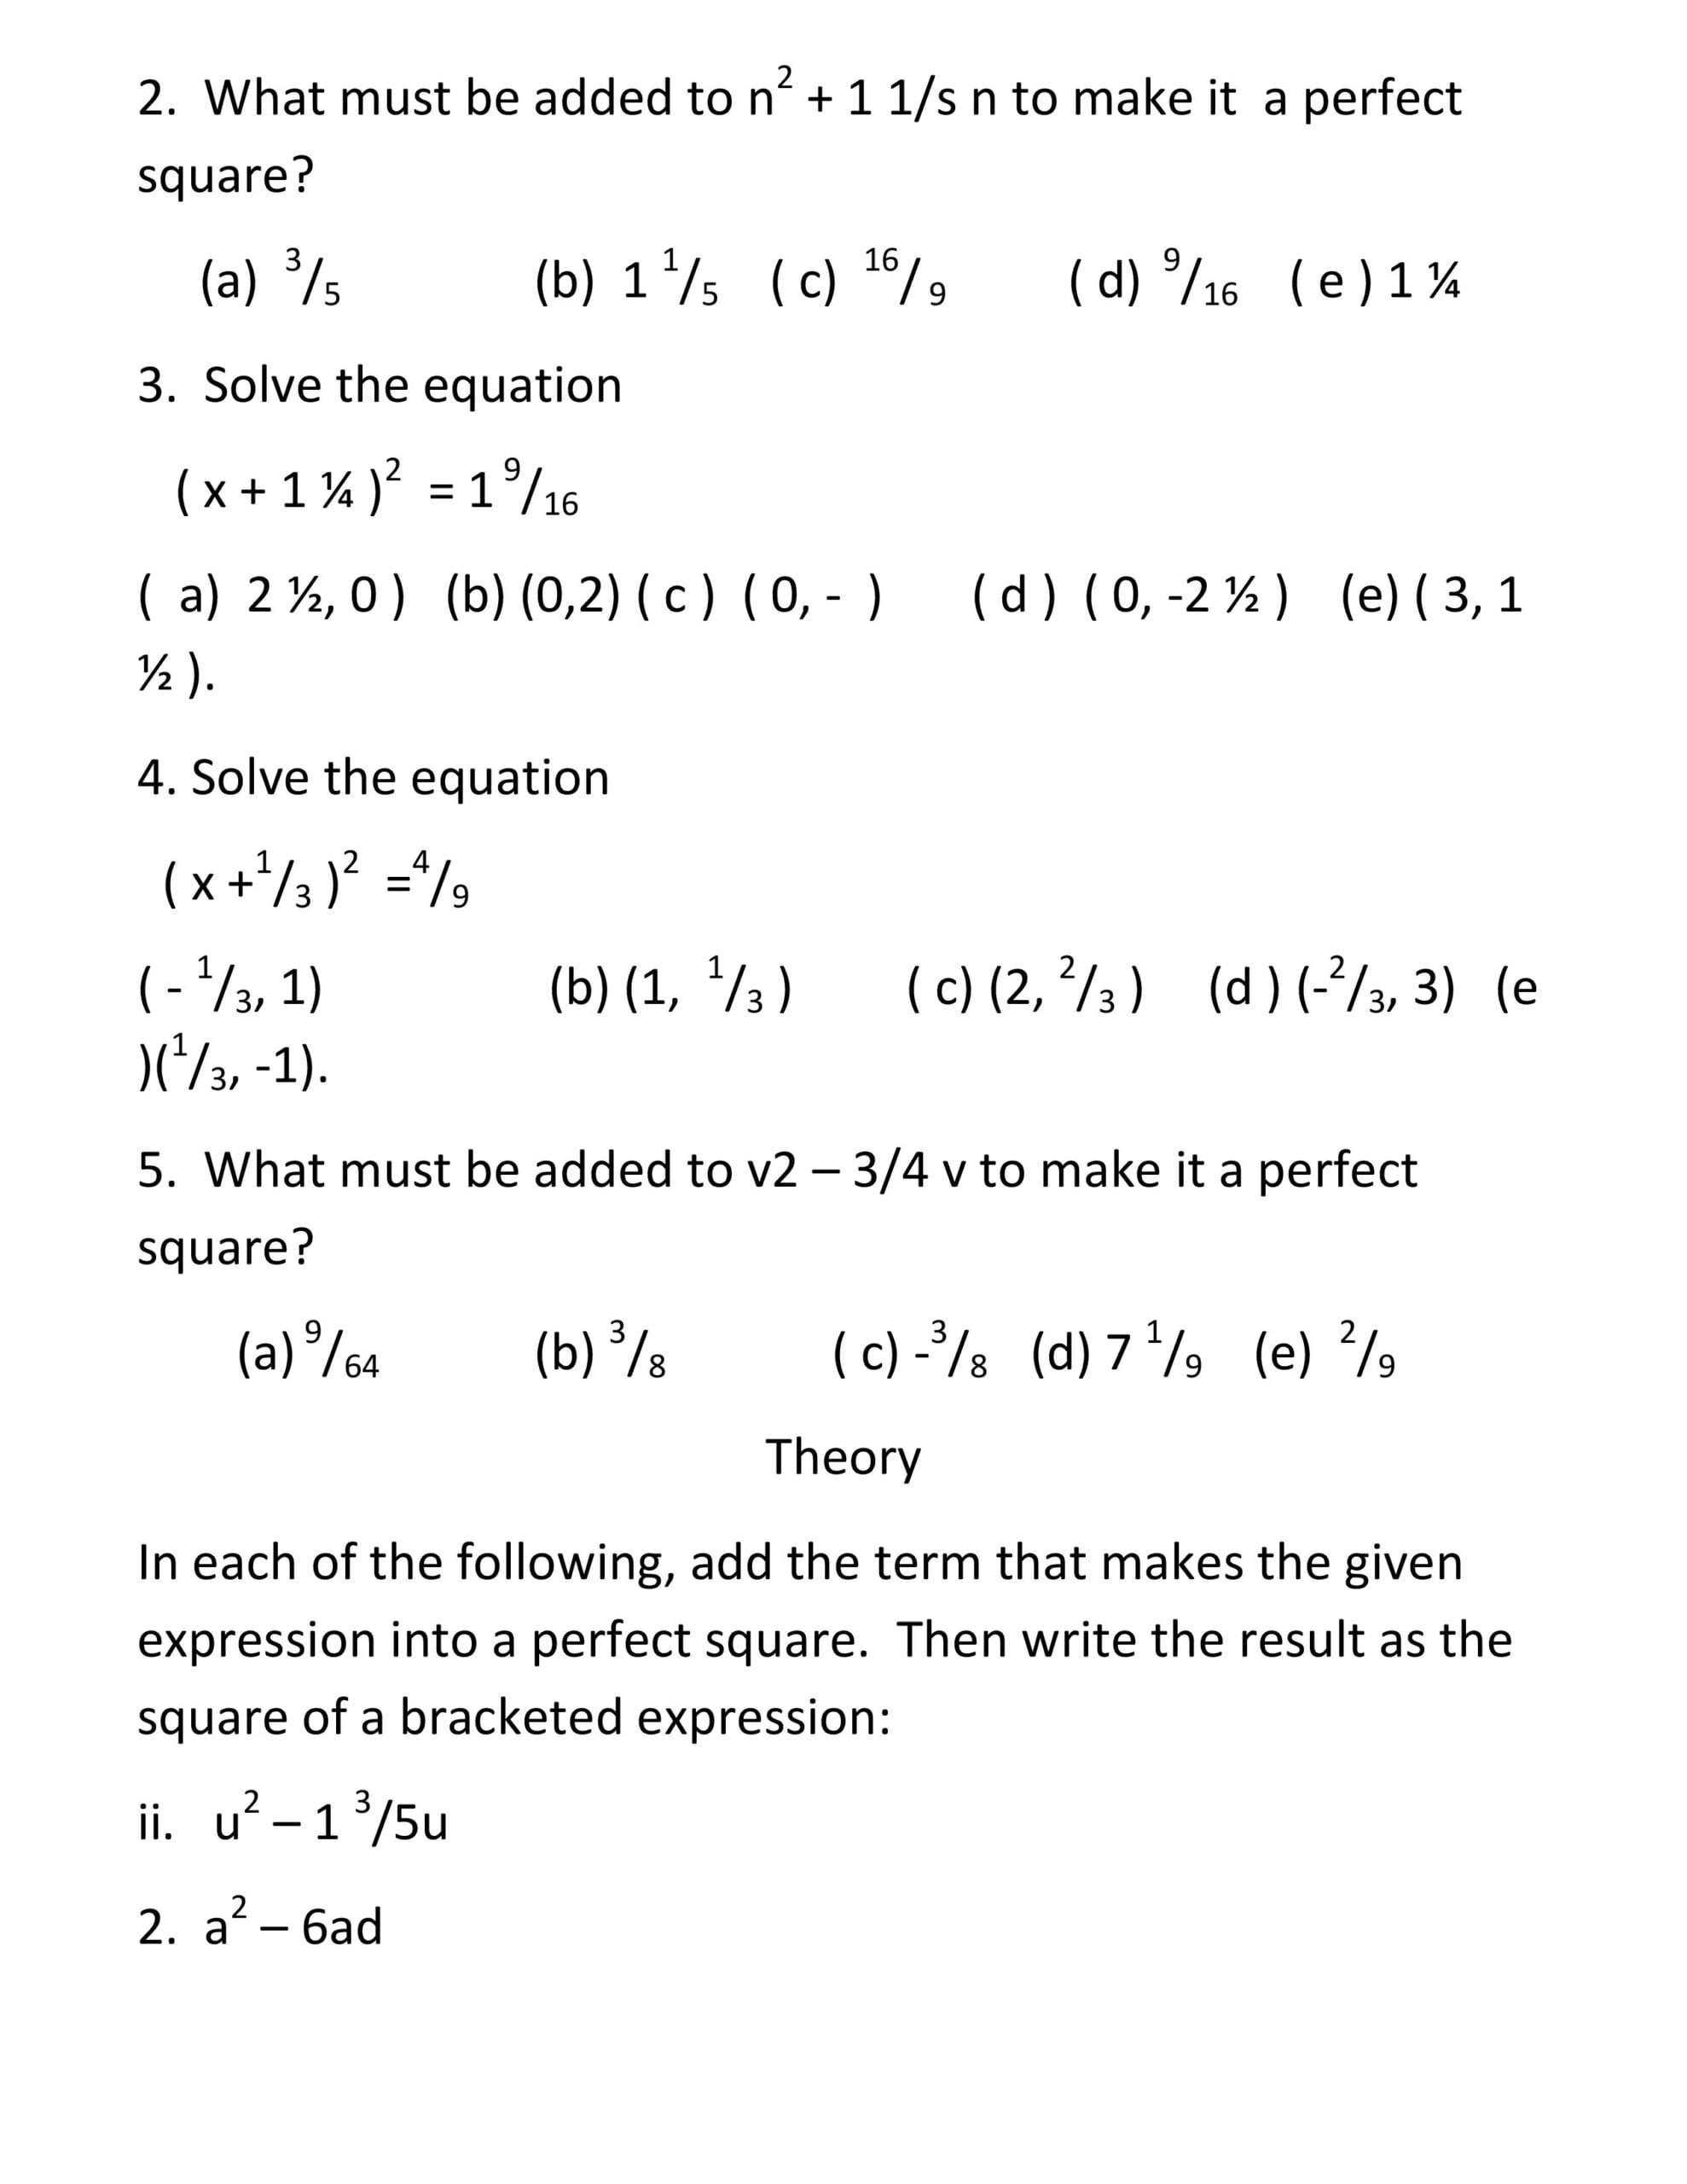 Completing the square_3